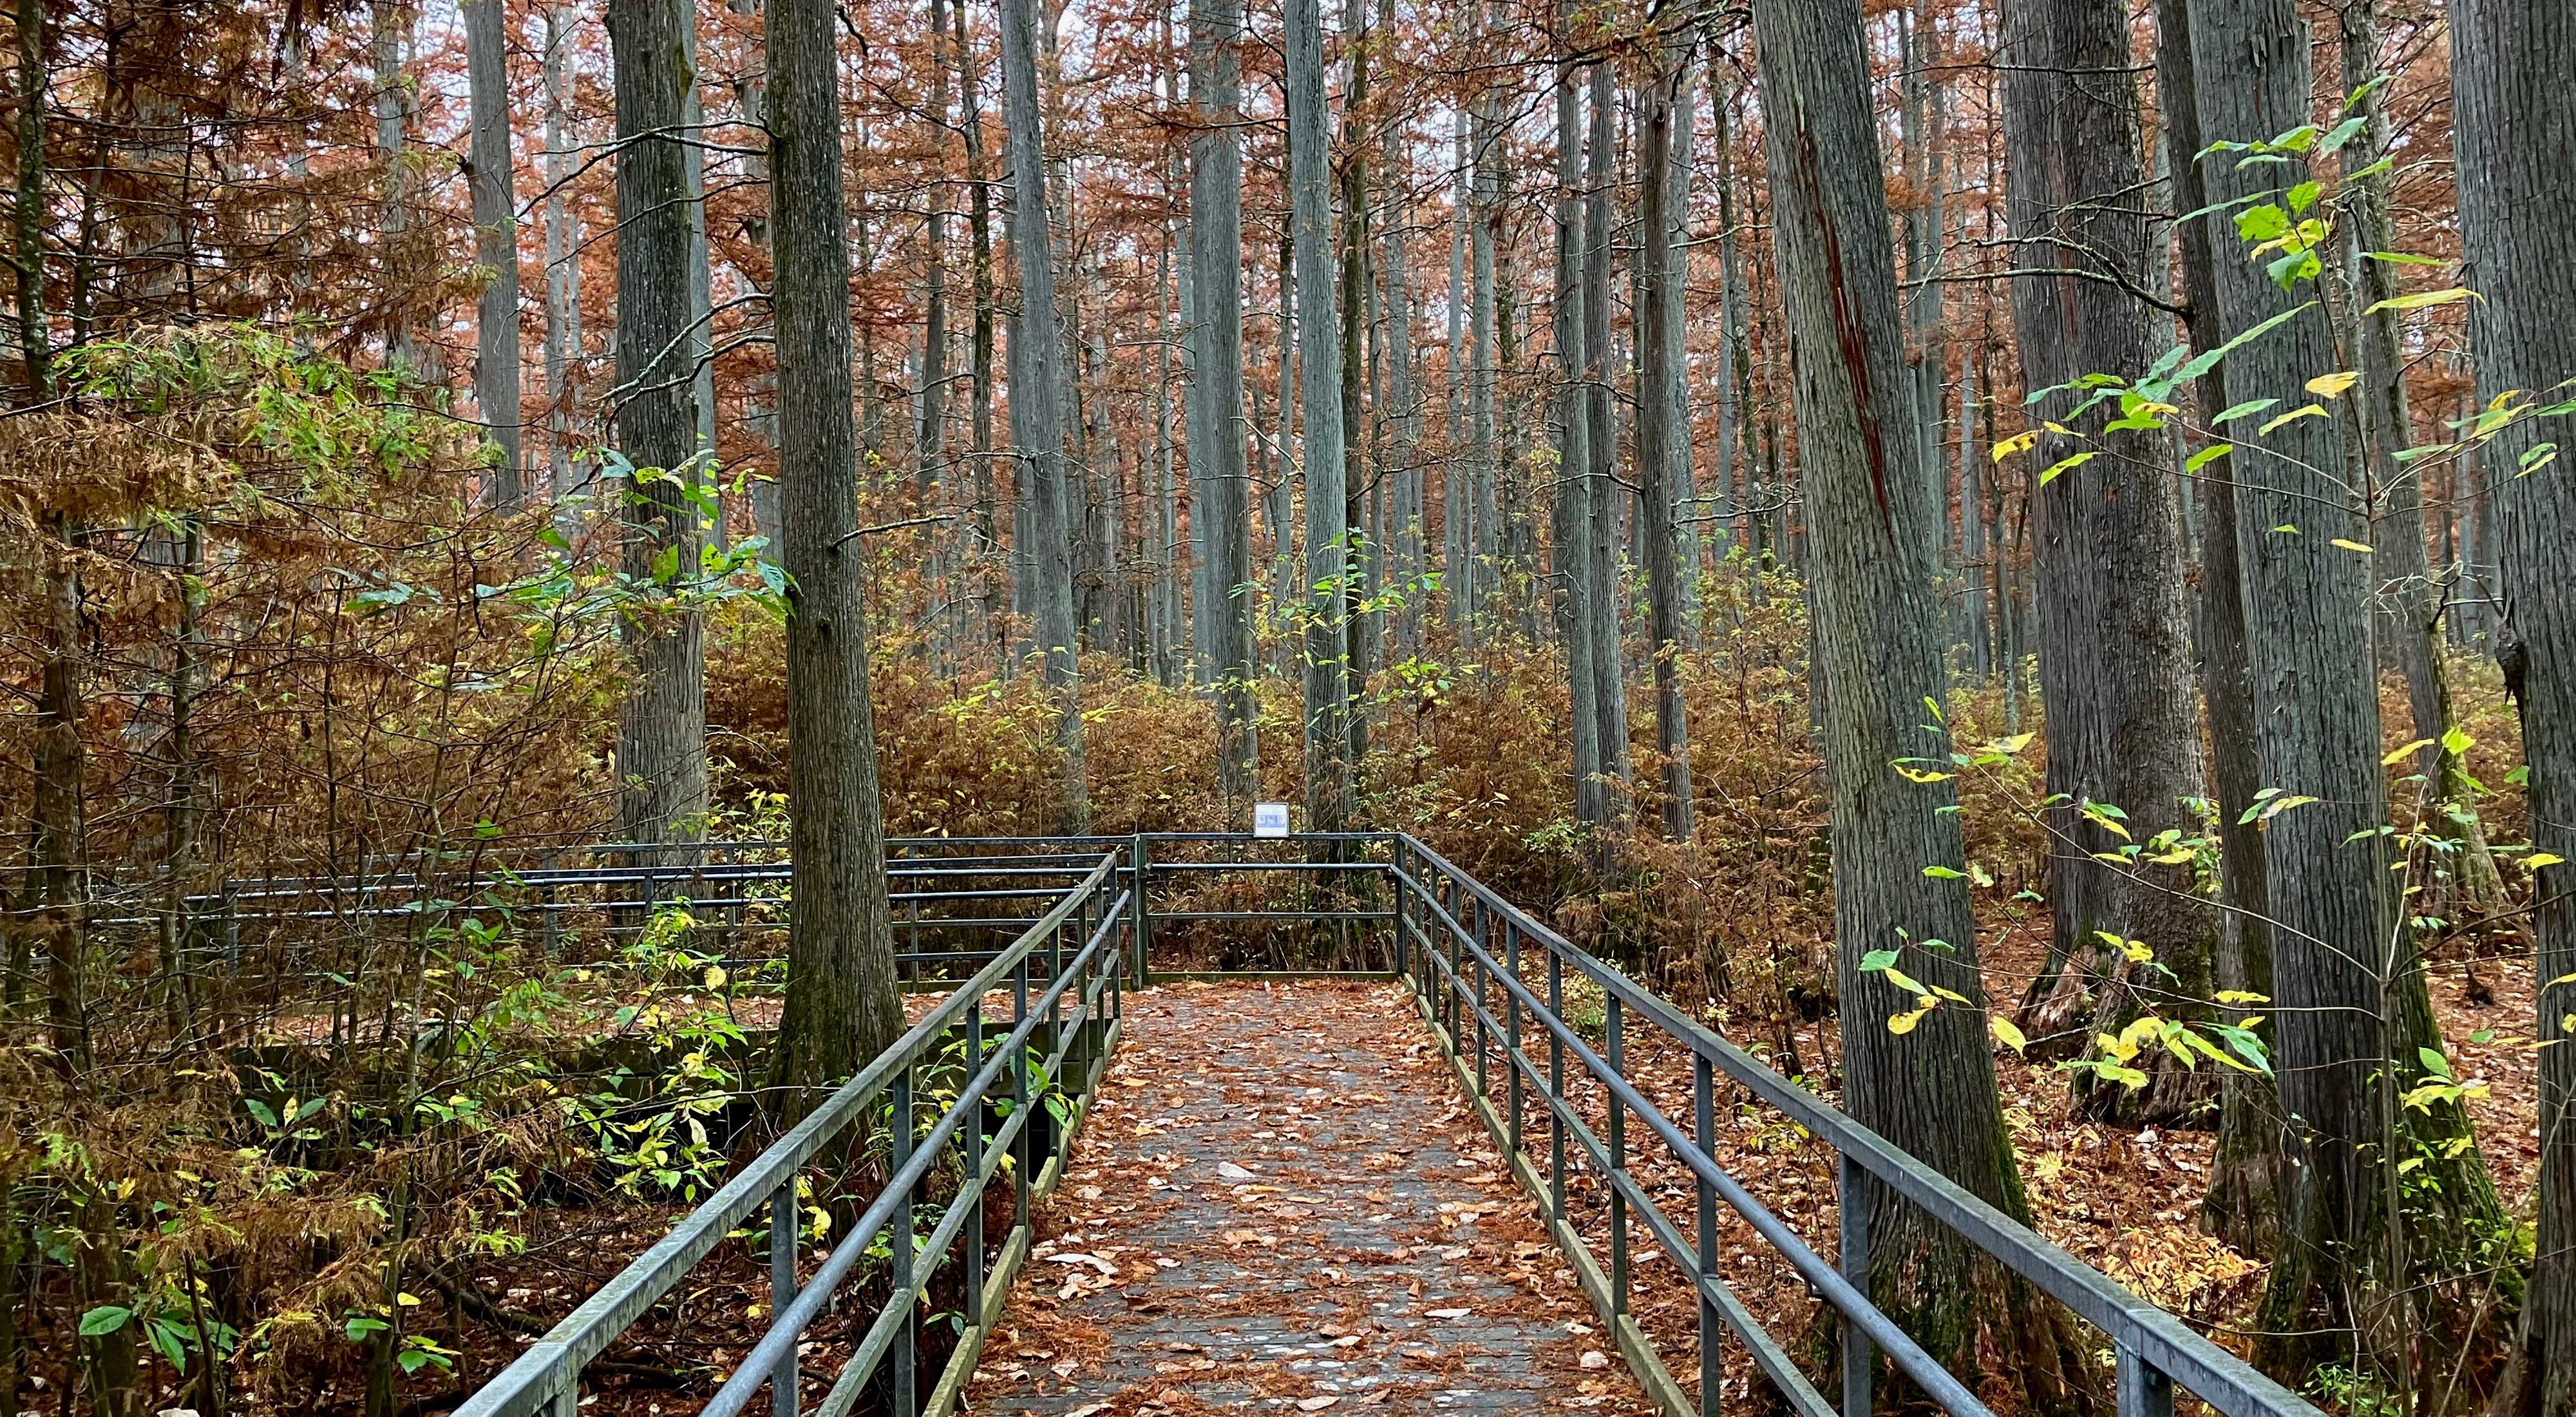 Boardwalk through a forest of tall cypress trees.